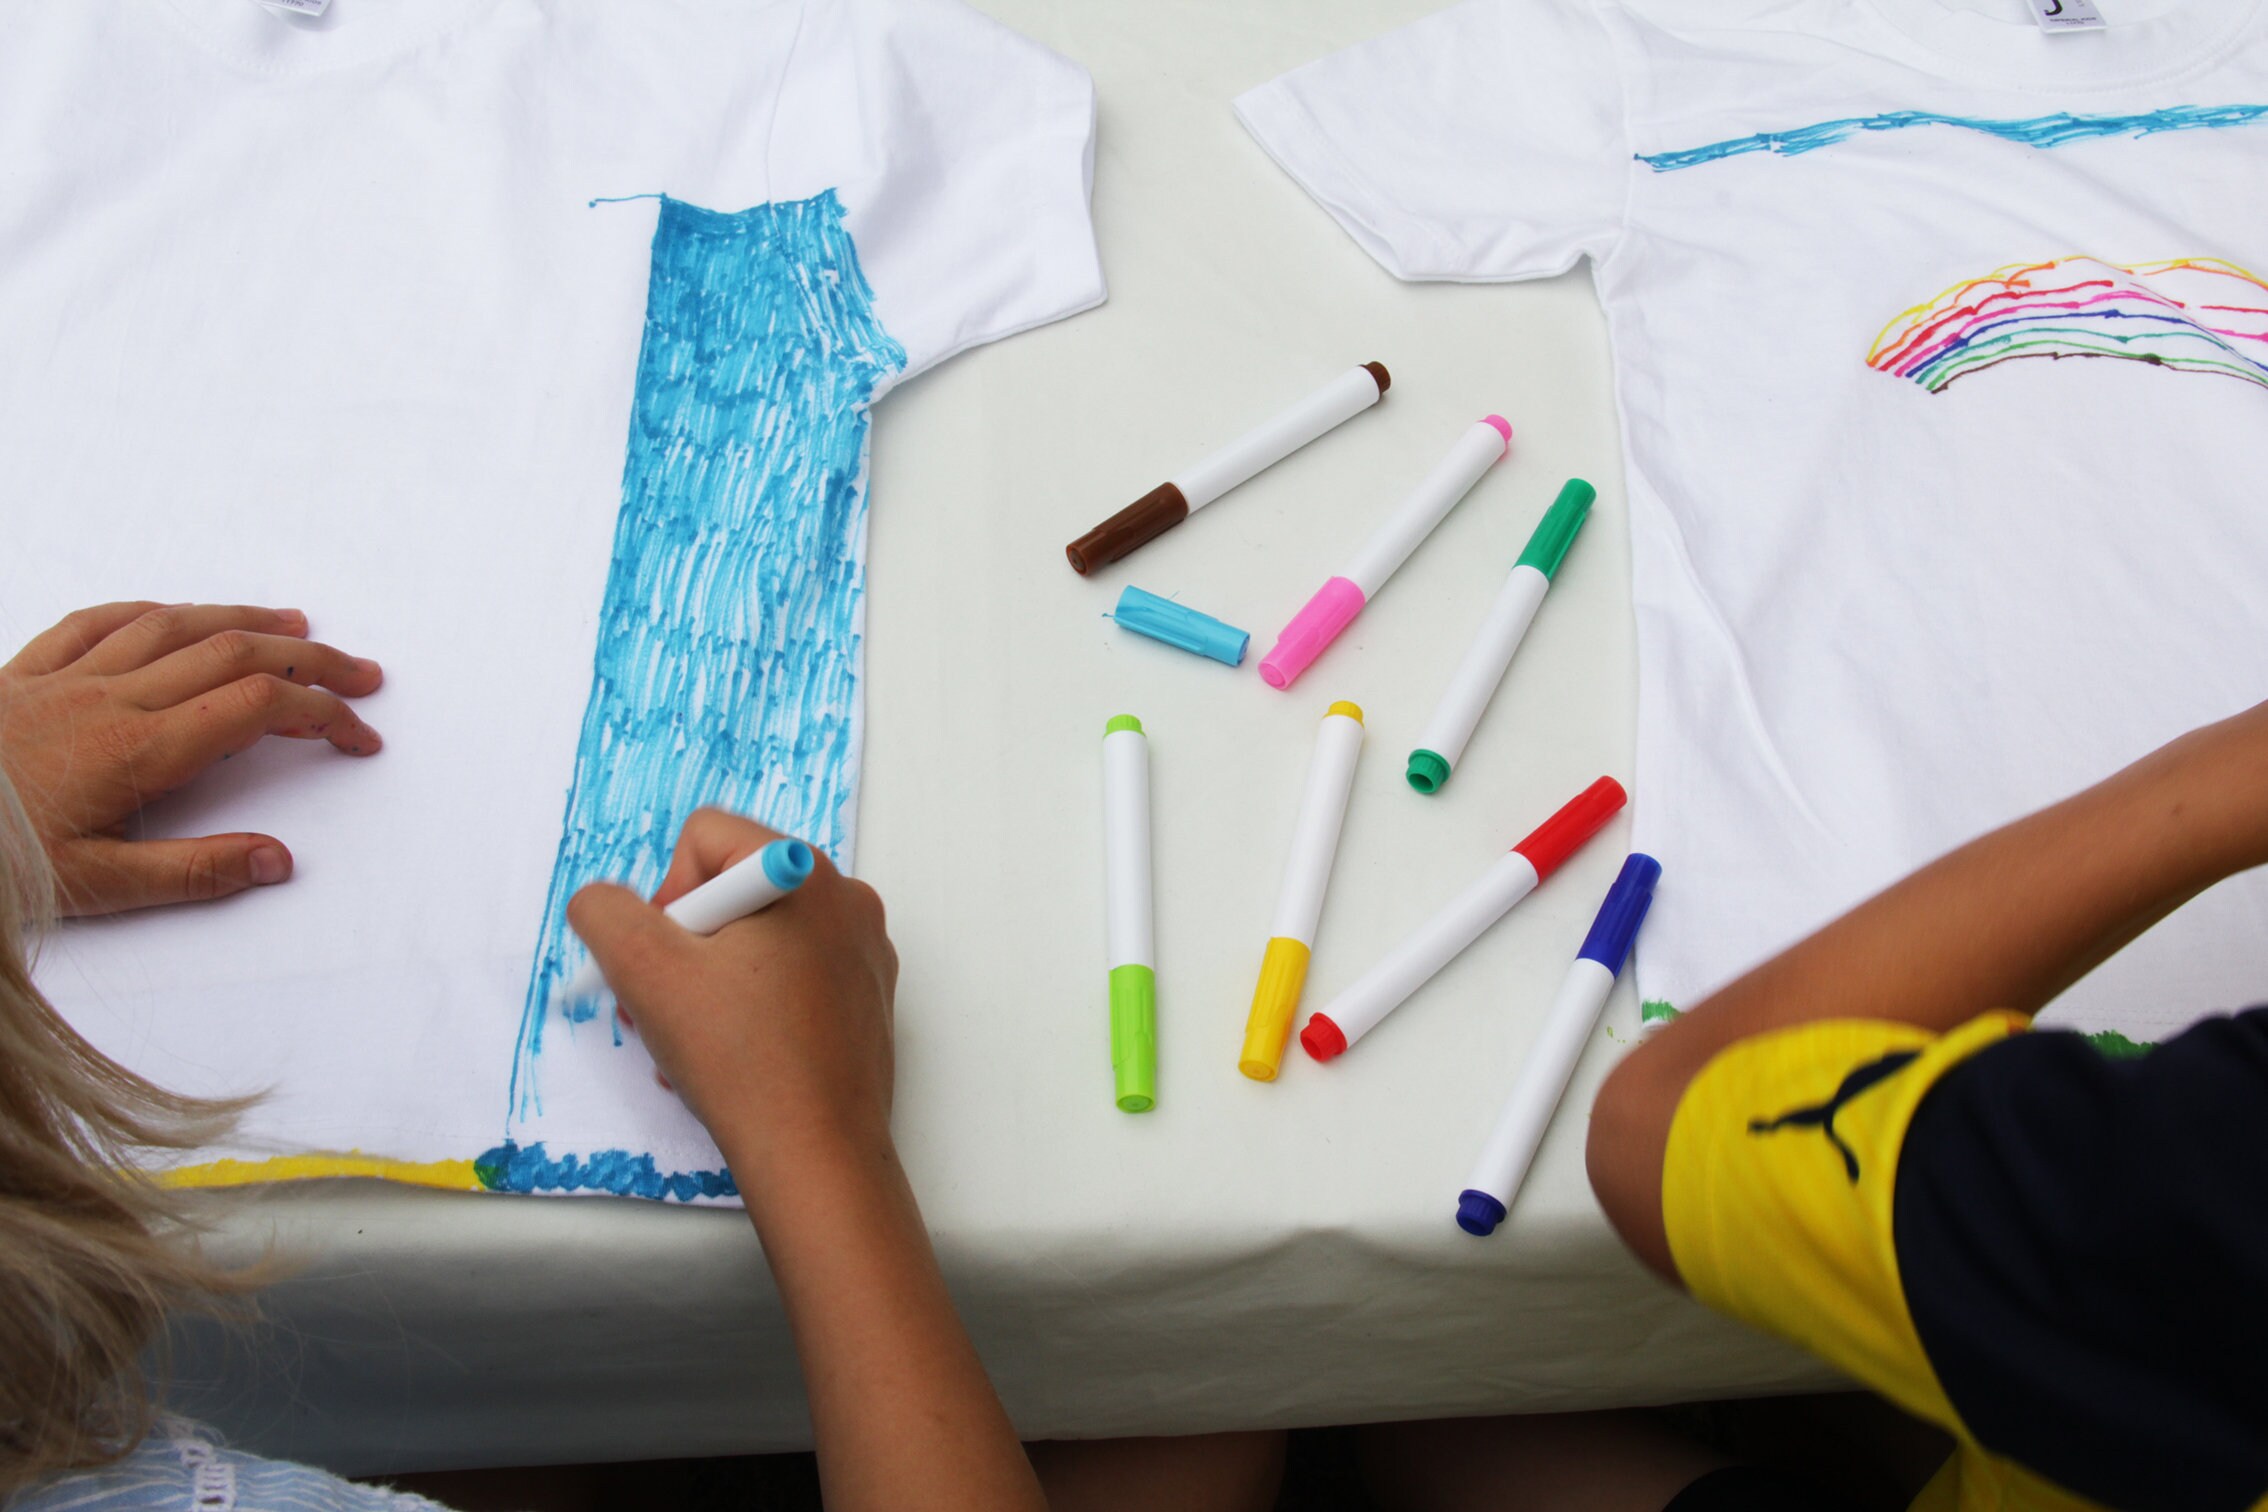 US company creates 'shirt kits' for kids to decorate at home - Images  magazine